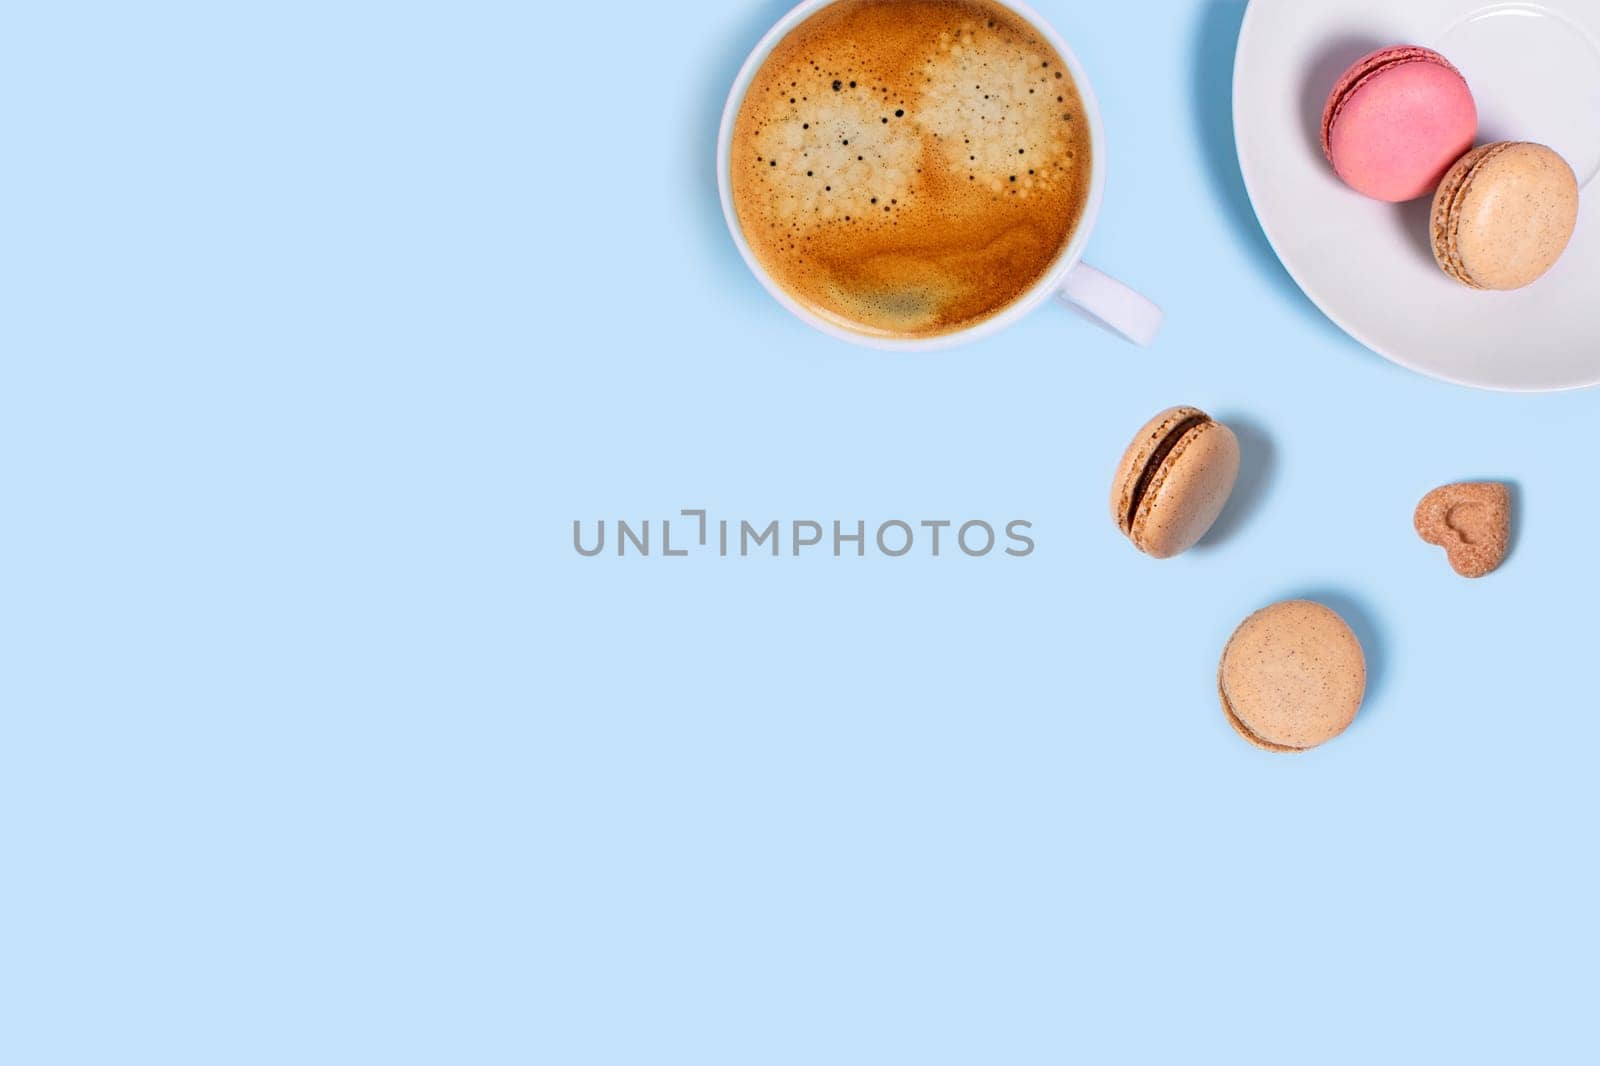 Blue background with macaroons and cup of coffee. Top view with space for your text.